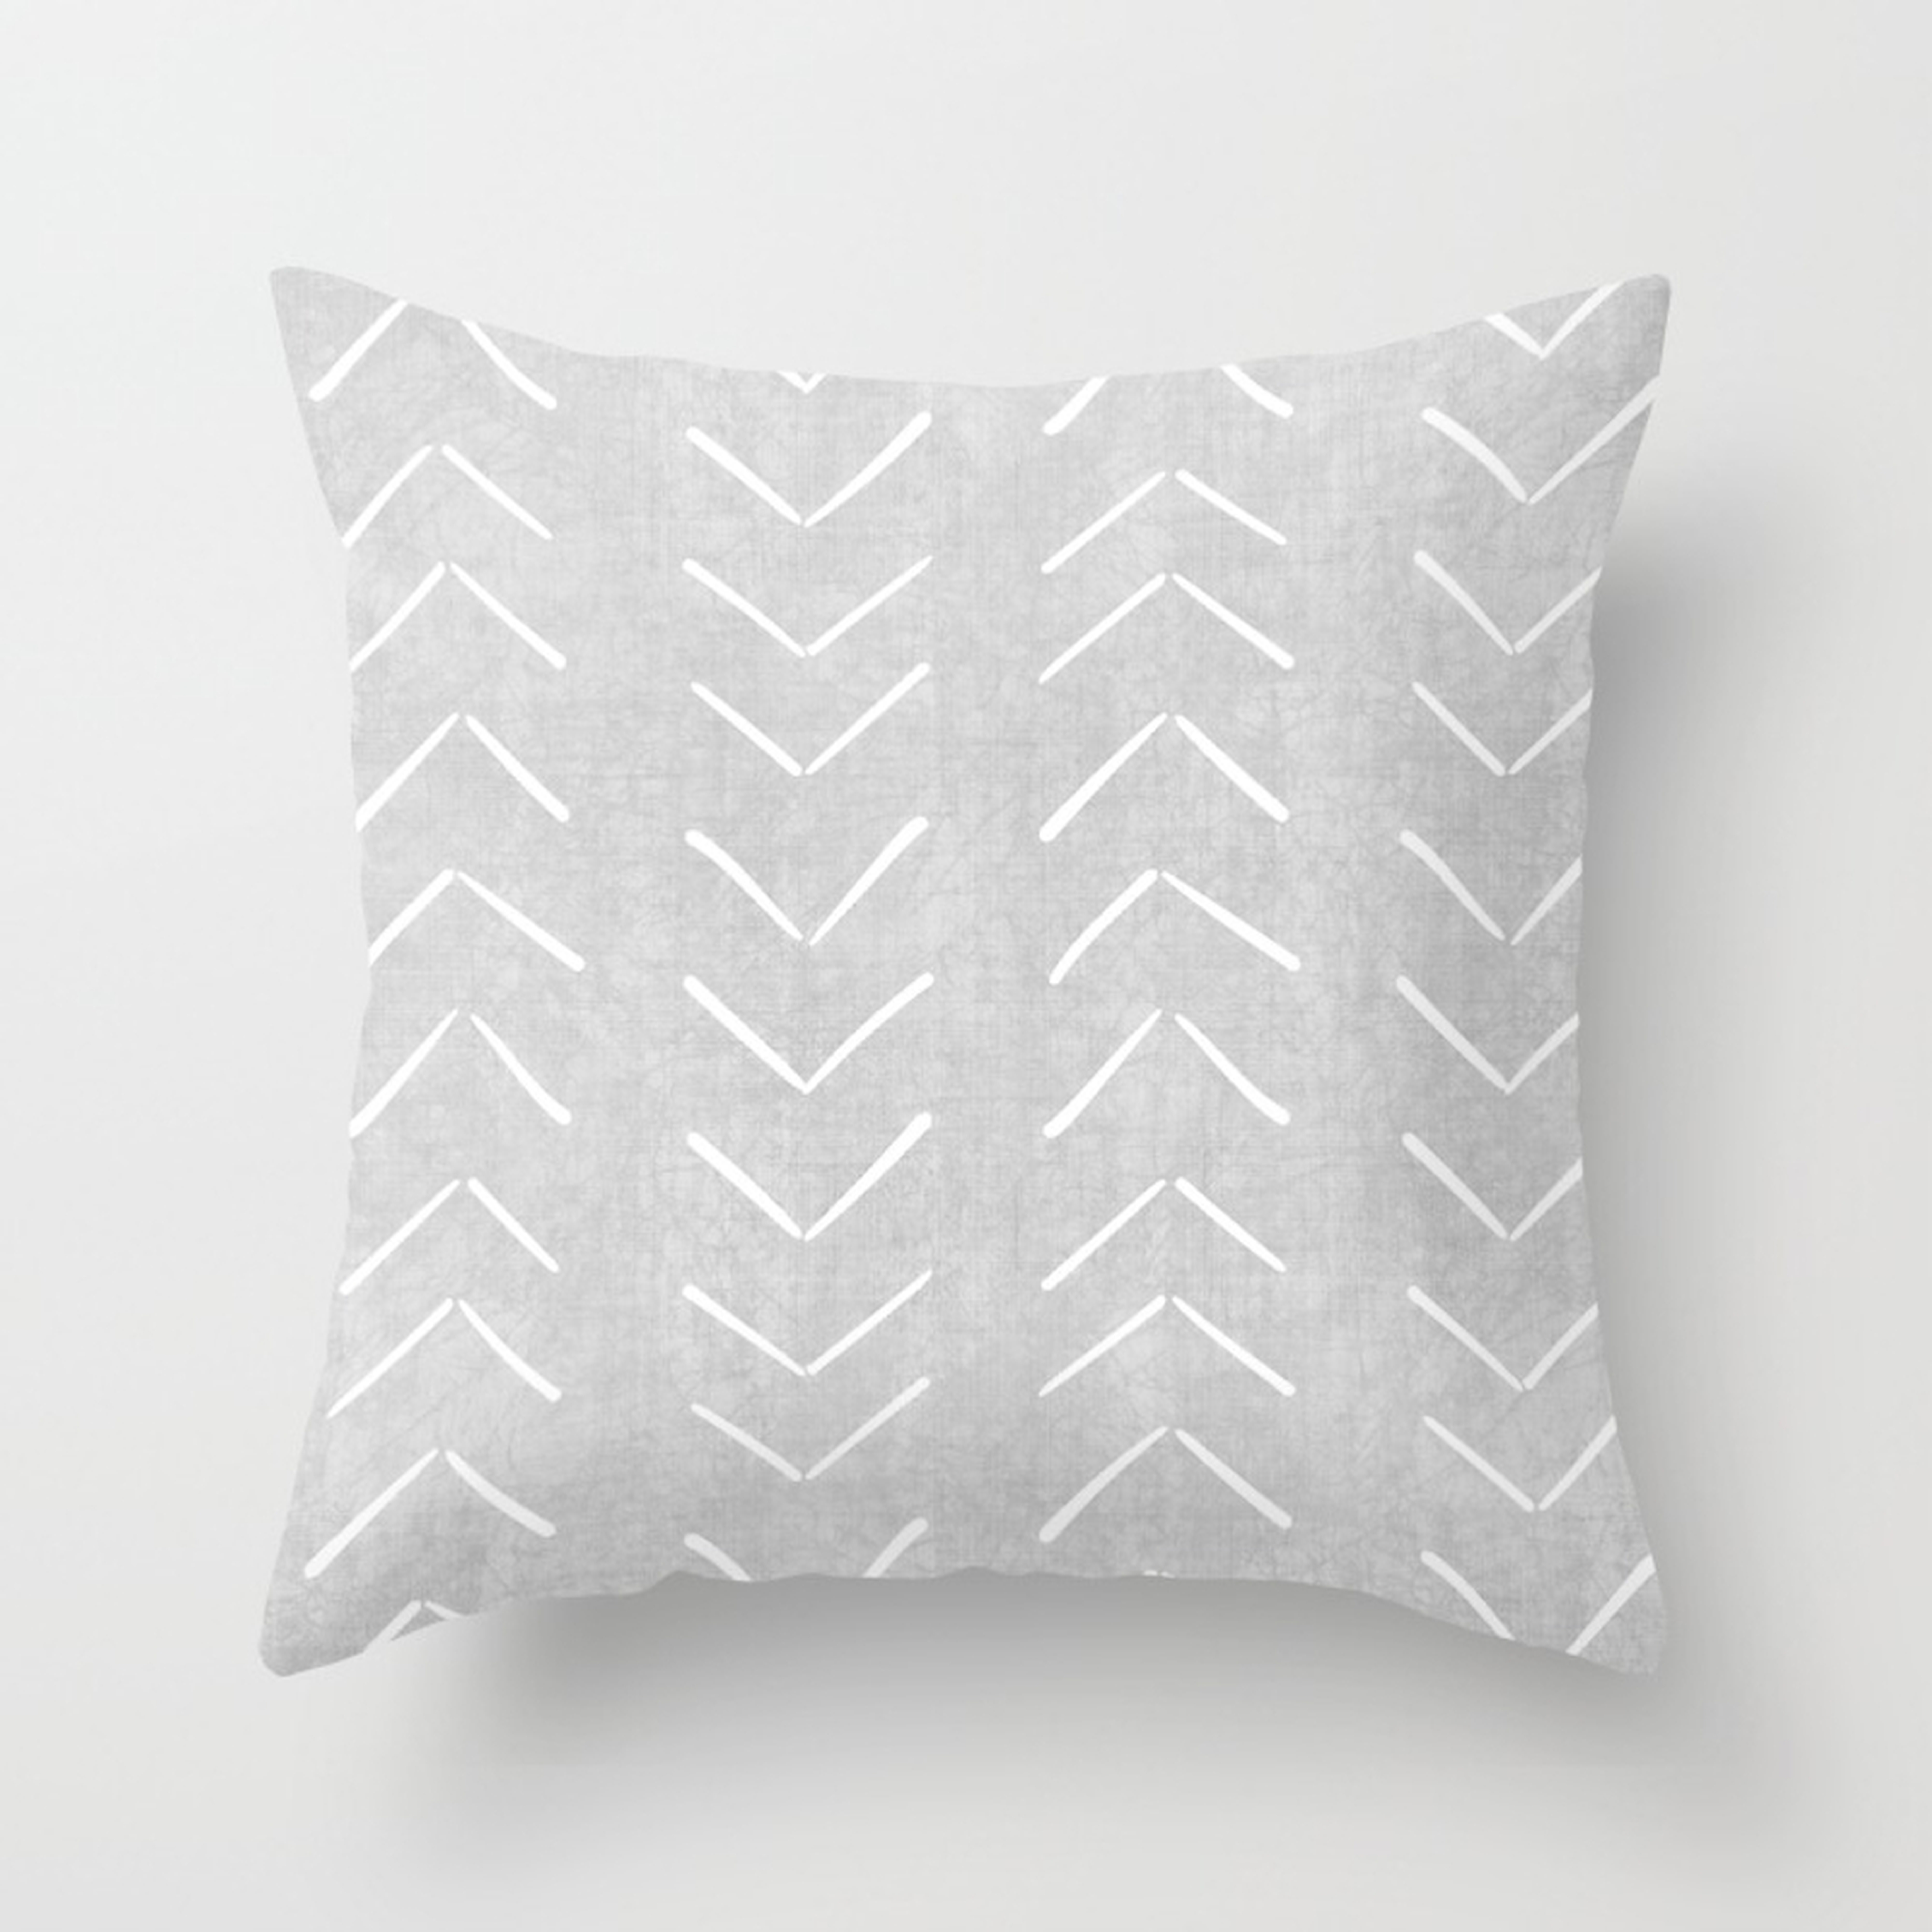 Boho Big Arrows In Grey Throw Pillow by House Of Haha - Cover (20" x 20") With Pillow Insert - Indoor Pillow - Society6